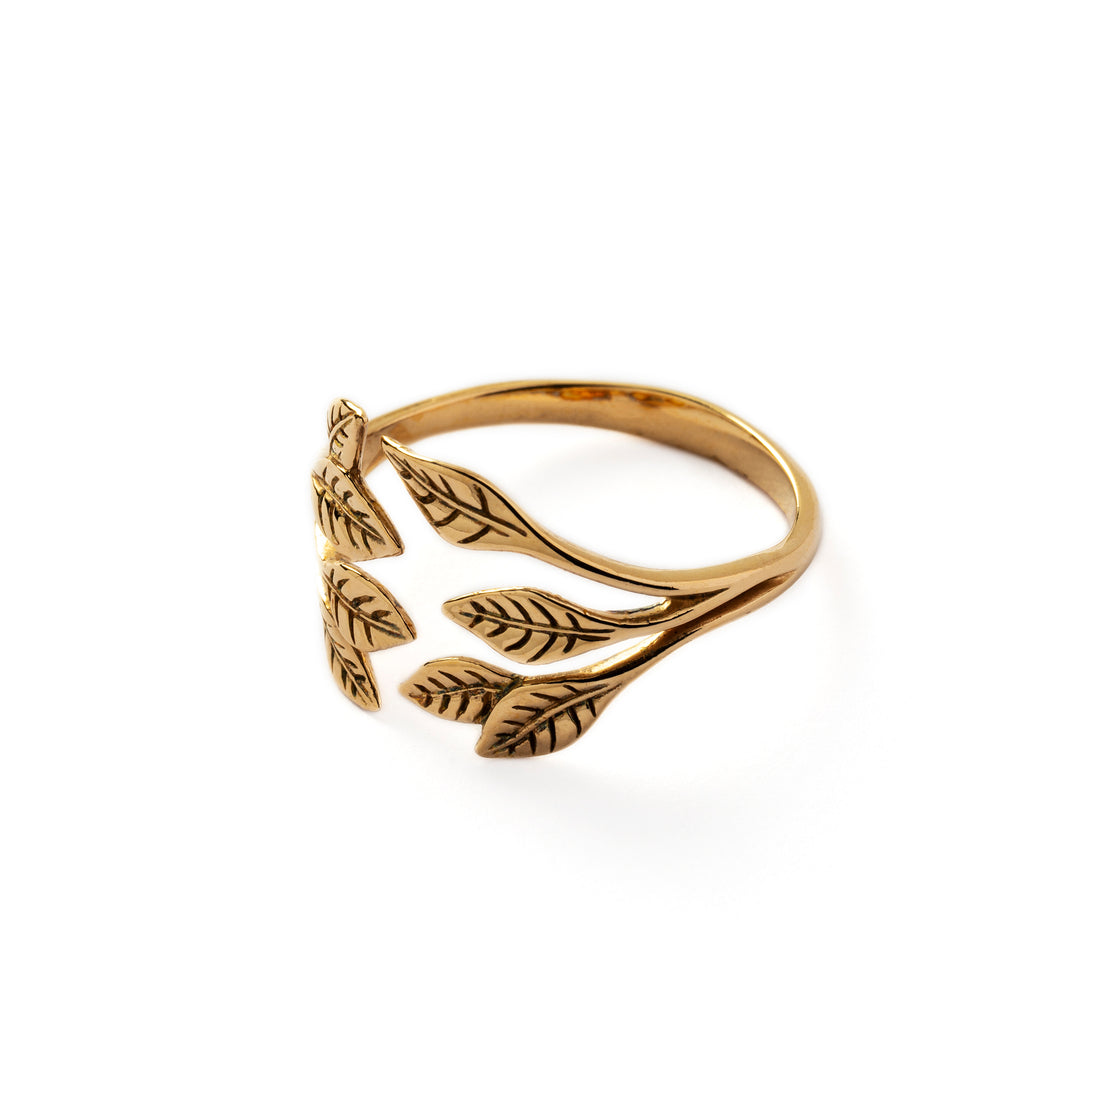 Bronze Leaf Hug Ring right side view